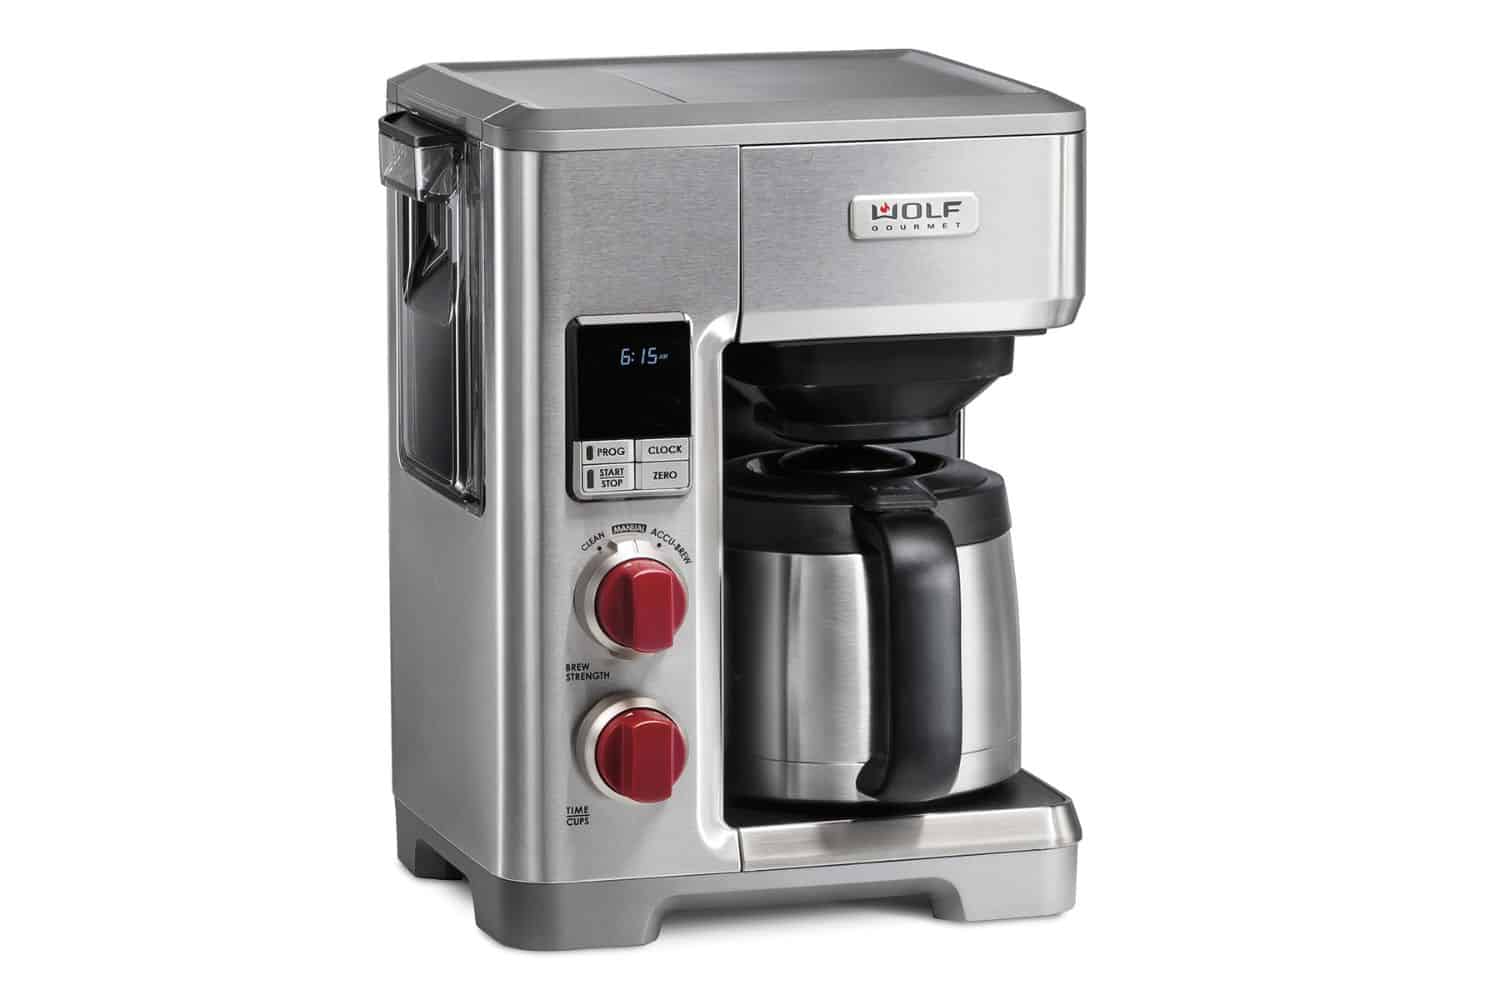  West Bend Drip Coffee Maker Brews Hot or Iced, Programmable  with Brew Strength Selector Auto Shut-Off and 6 Functions Permanent Mesh  Filter and Glass Carafe, 12-Cup, Metallic,Silver: Home & Kitchen